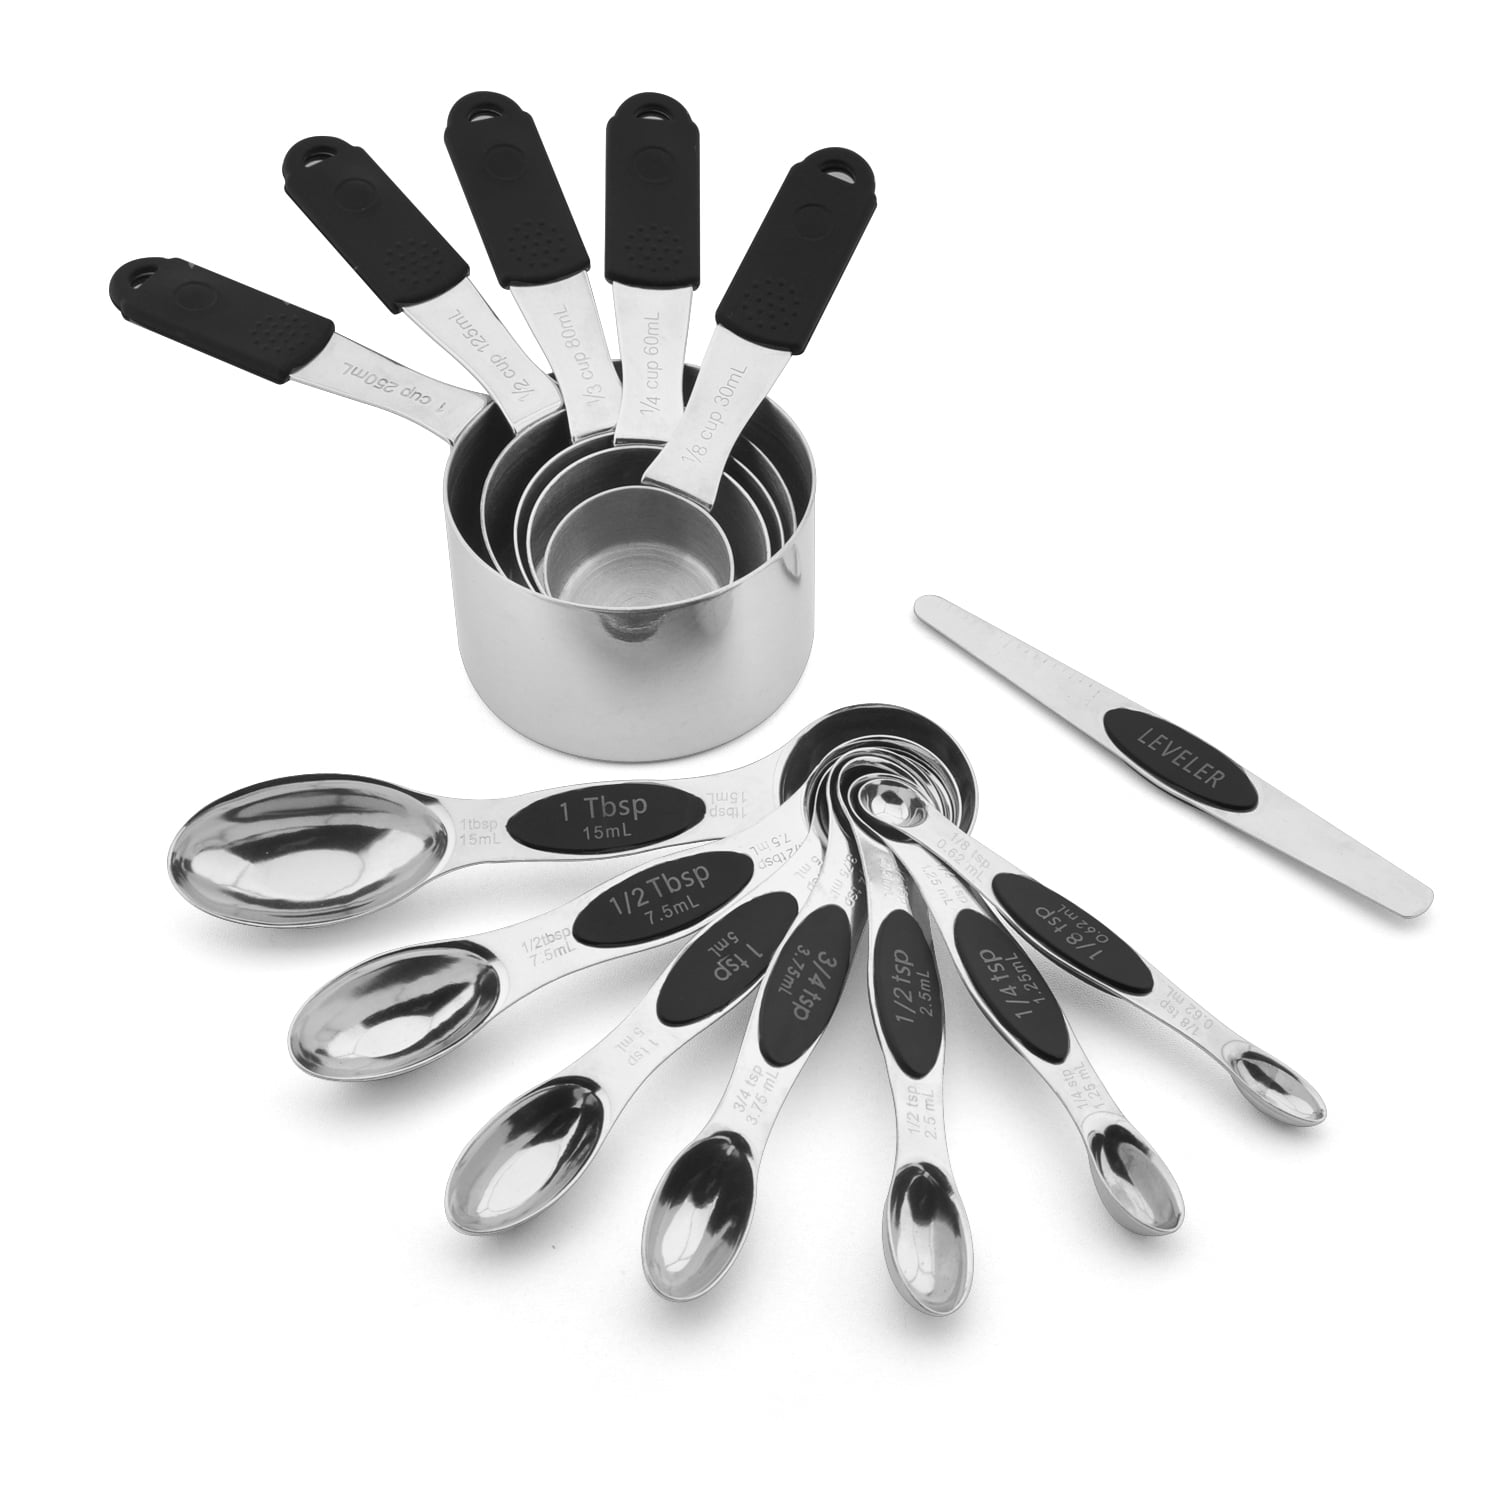 JFBL Hot Magnetic Measuring Cups And Spoons Set Including 7